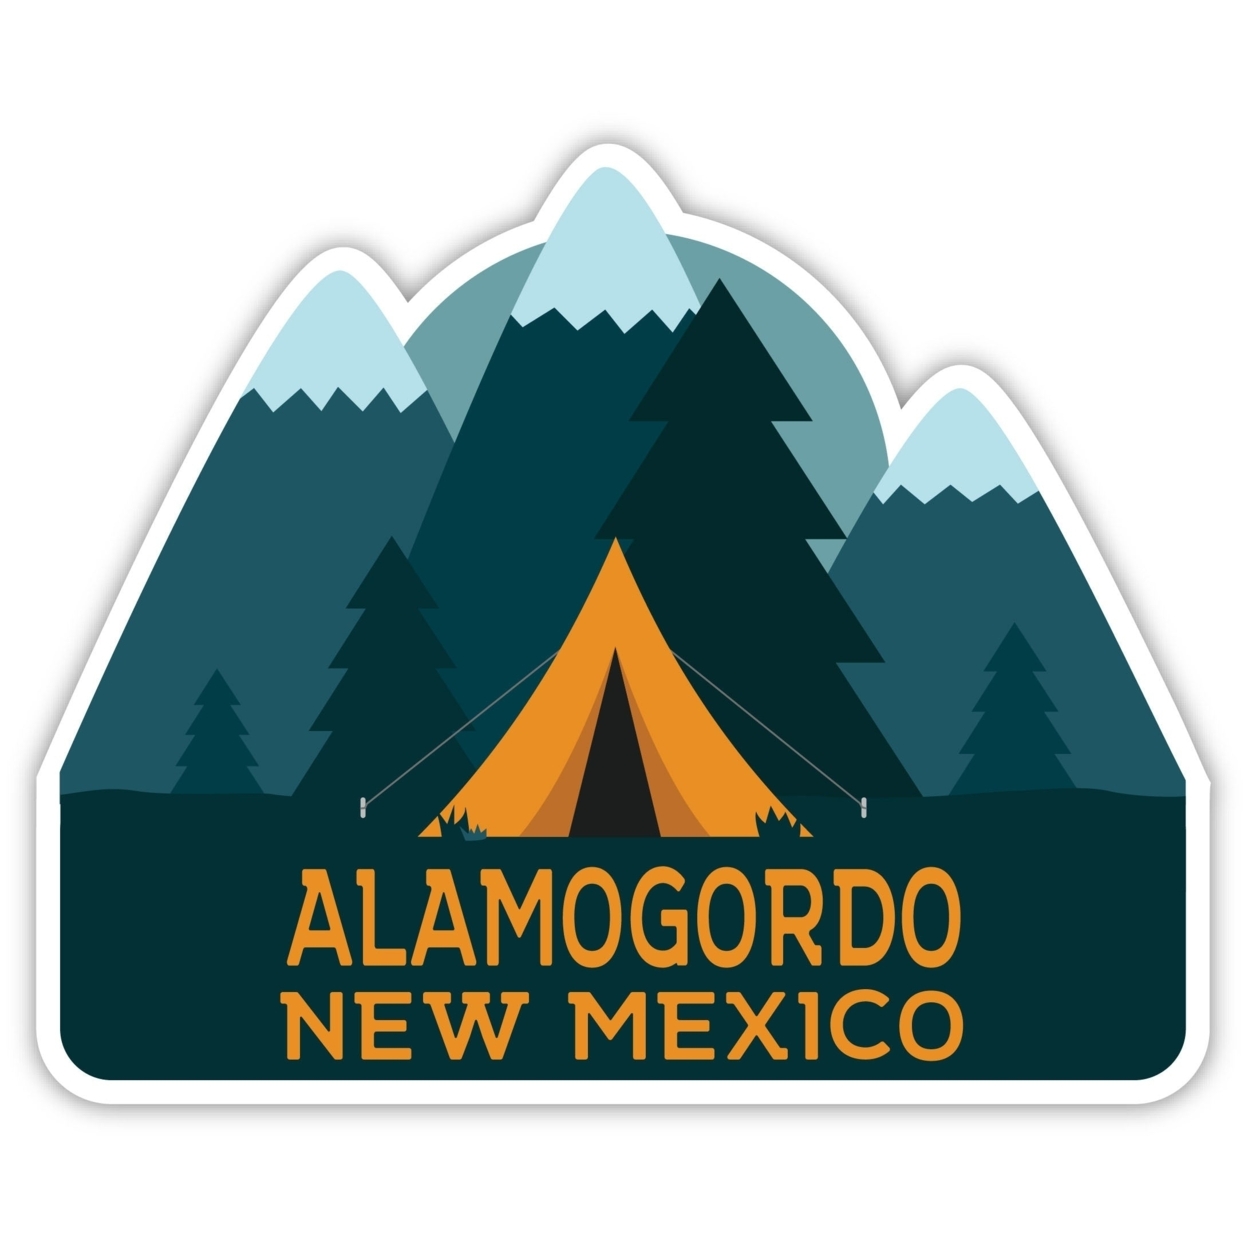 Alamogordo New Mexico Souvenir Decorative Stickers (Choose Theme And Size) - 4-Pack, 4-Inch, Camp Life